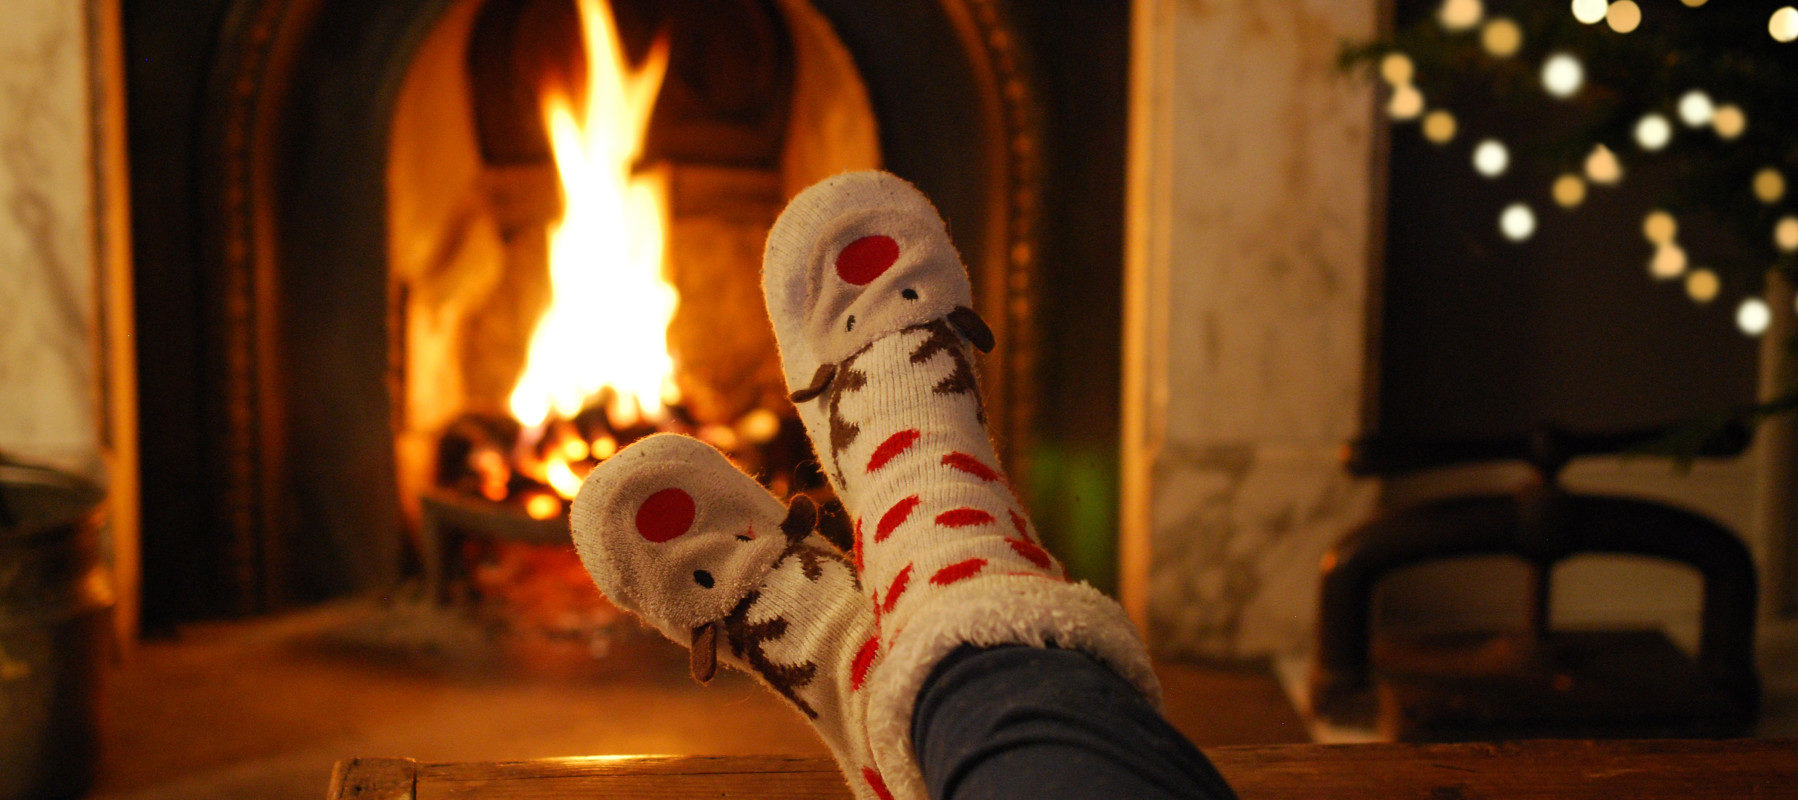 Winter Warmer For Landlords - Cost Of Improving EPC Rating Capped!